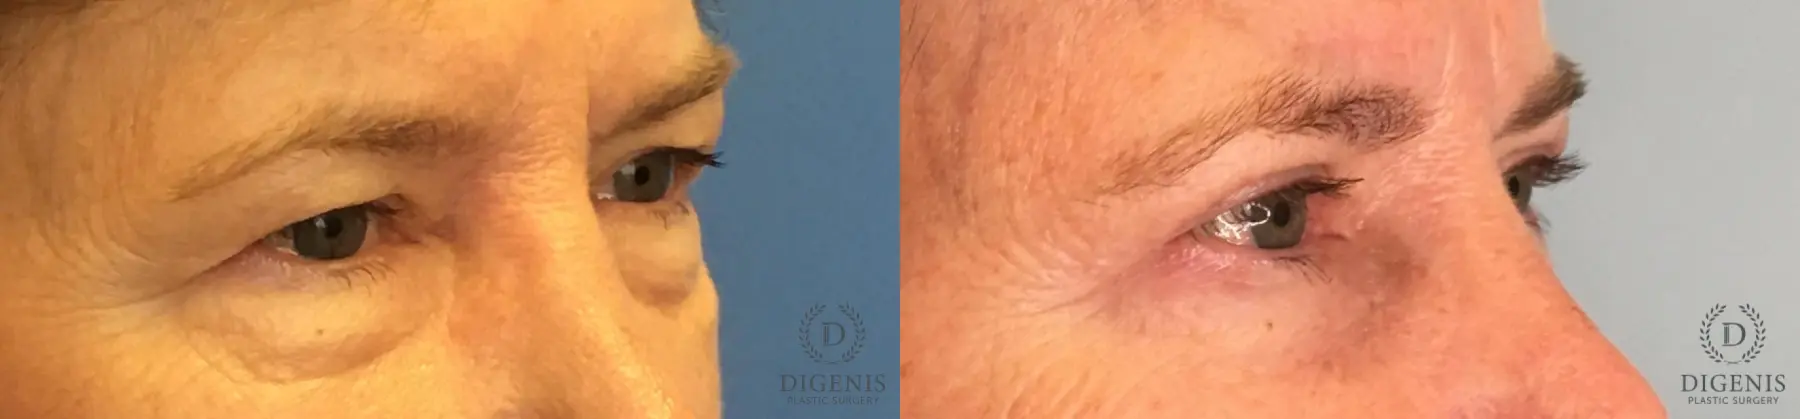 Blepharoplasty: Patient 12 - Before and After 2